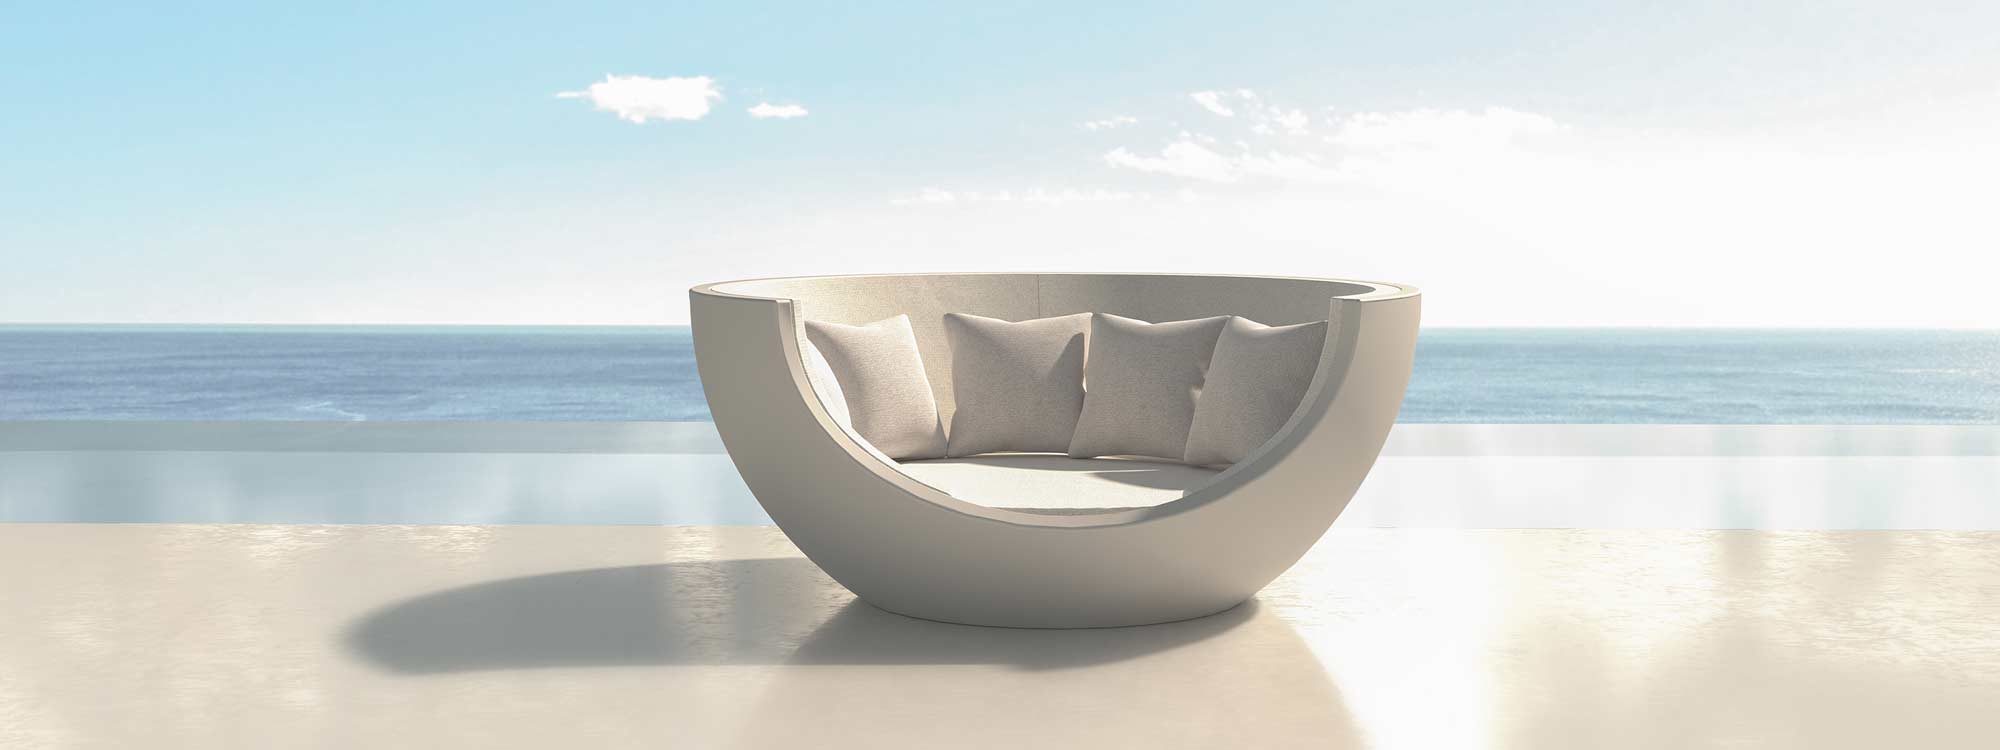 Image of Vondom Moon modern outdoor daybed with white structure and white cushions